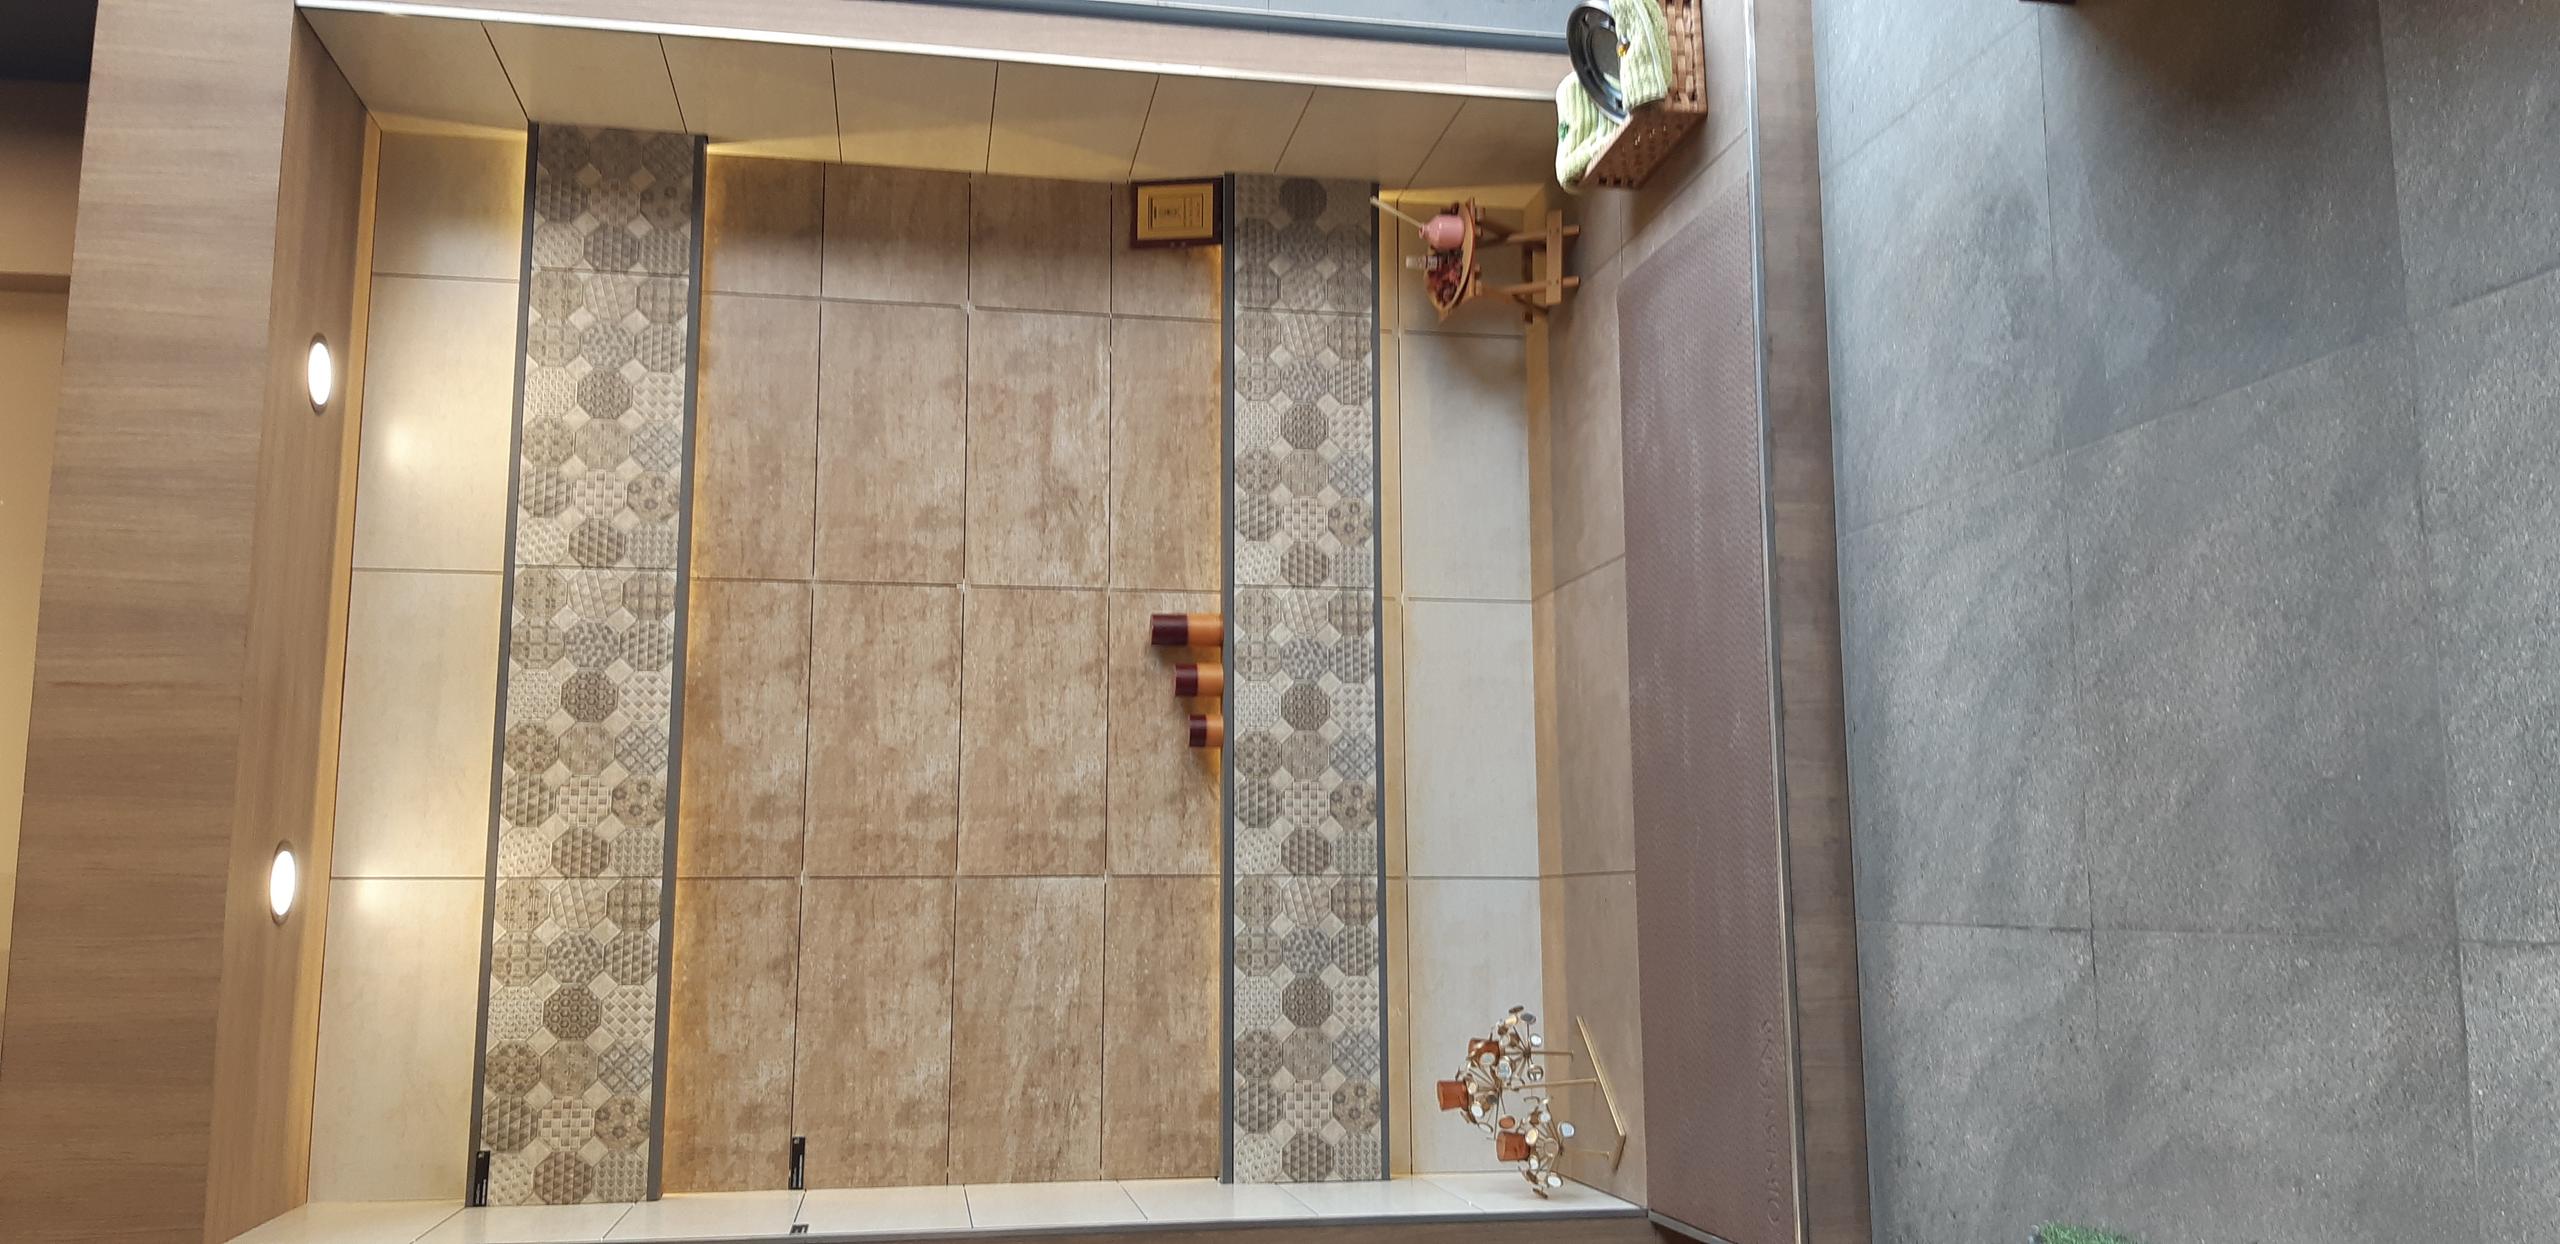 Orientbell Signature Company Tiles Showroom in Pune